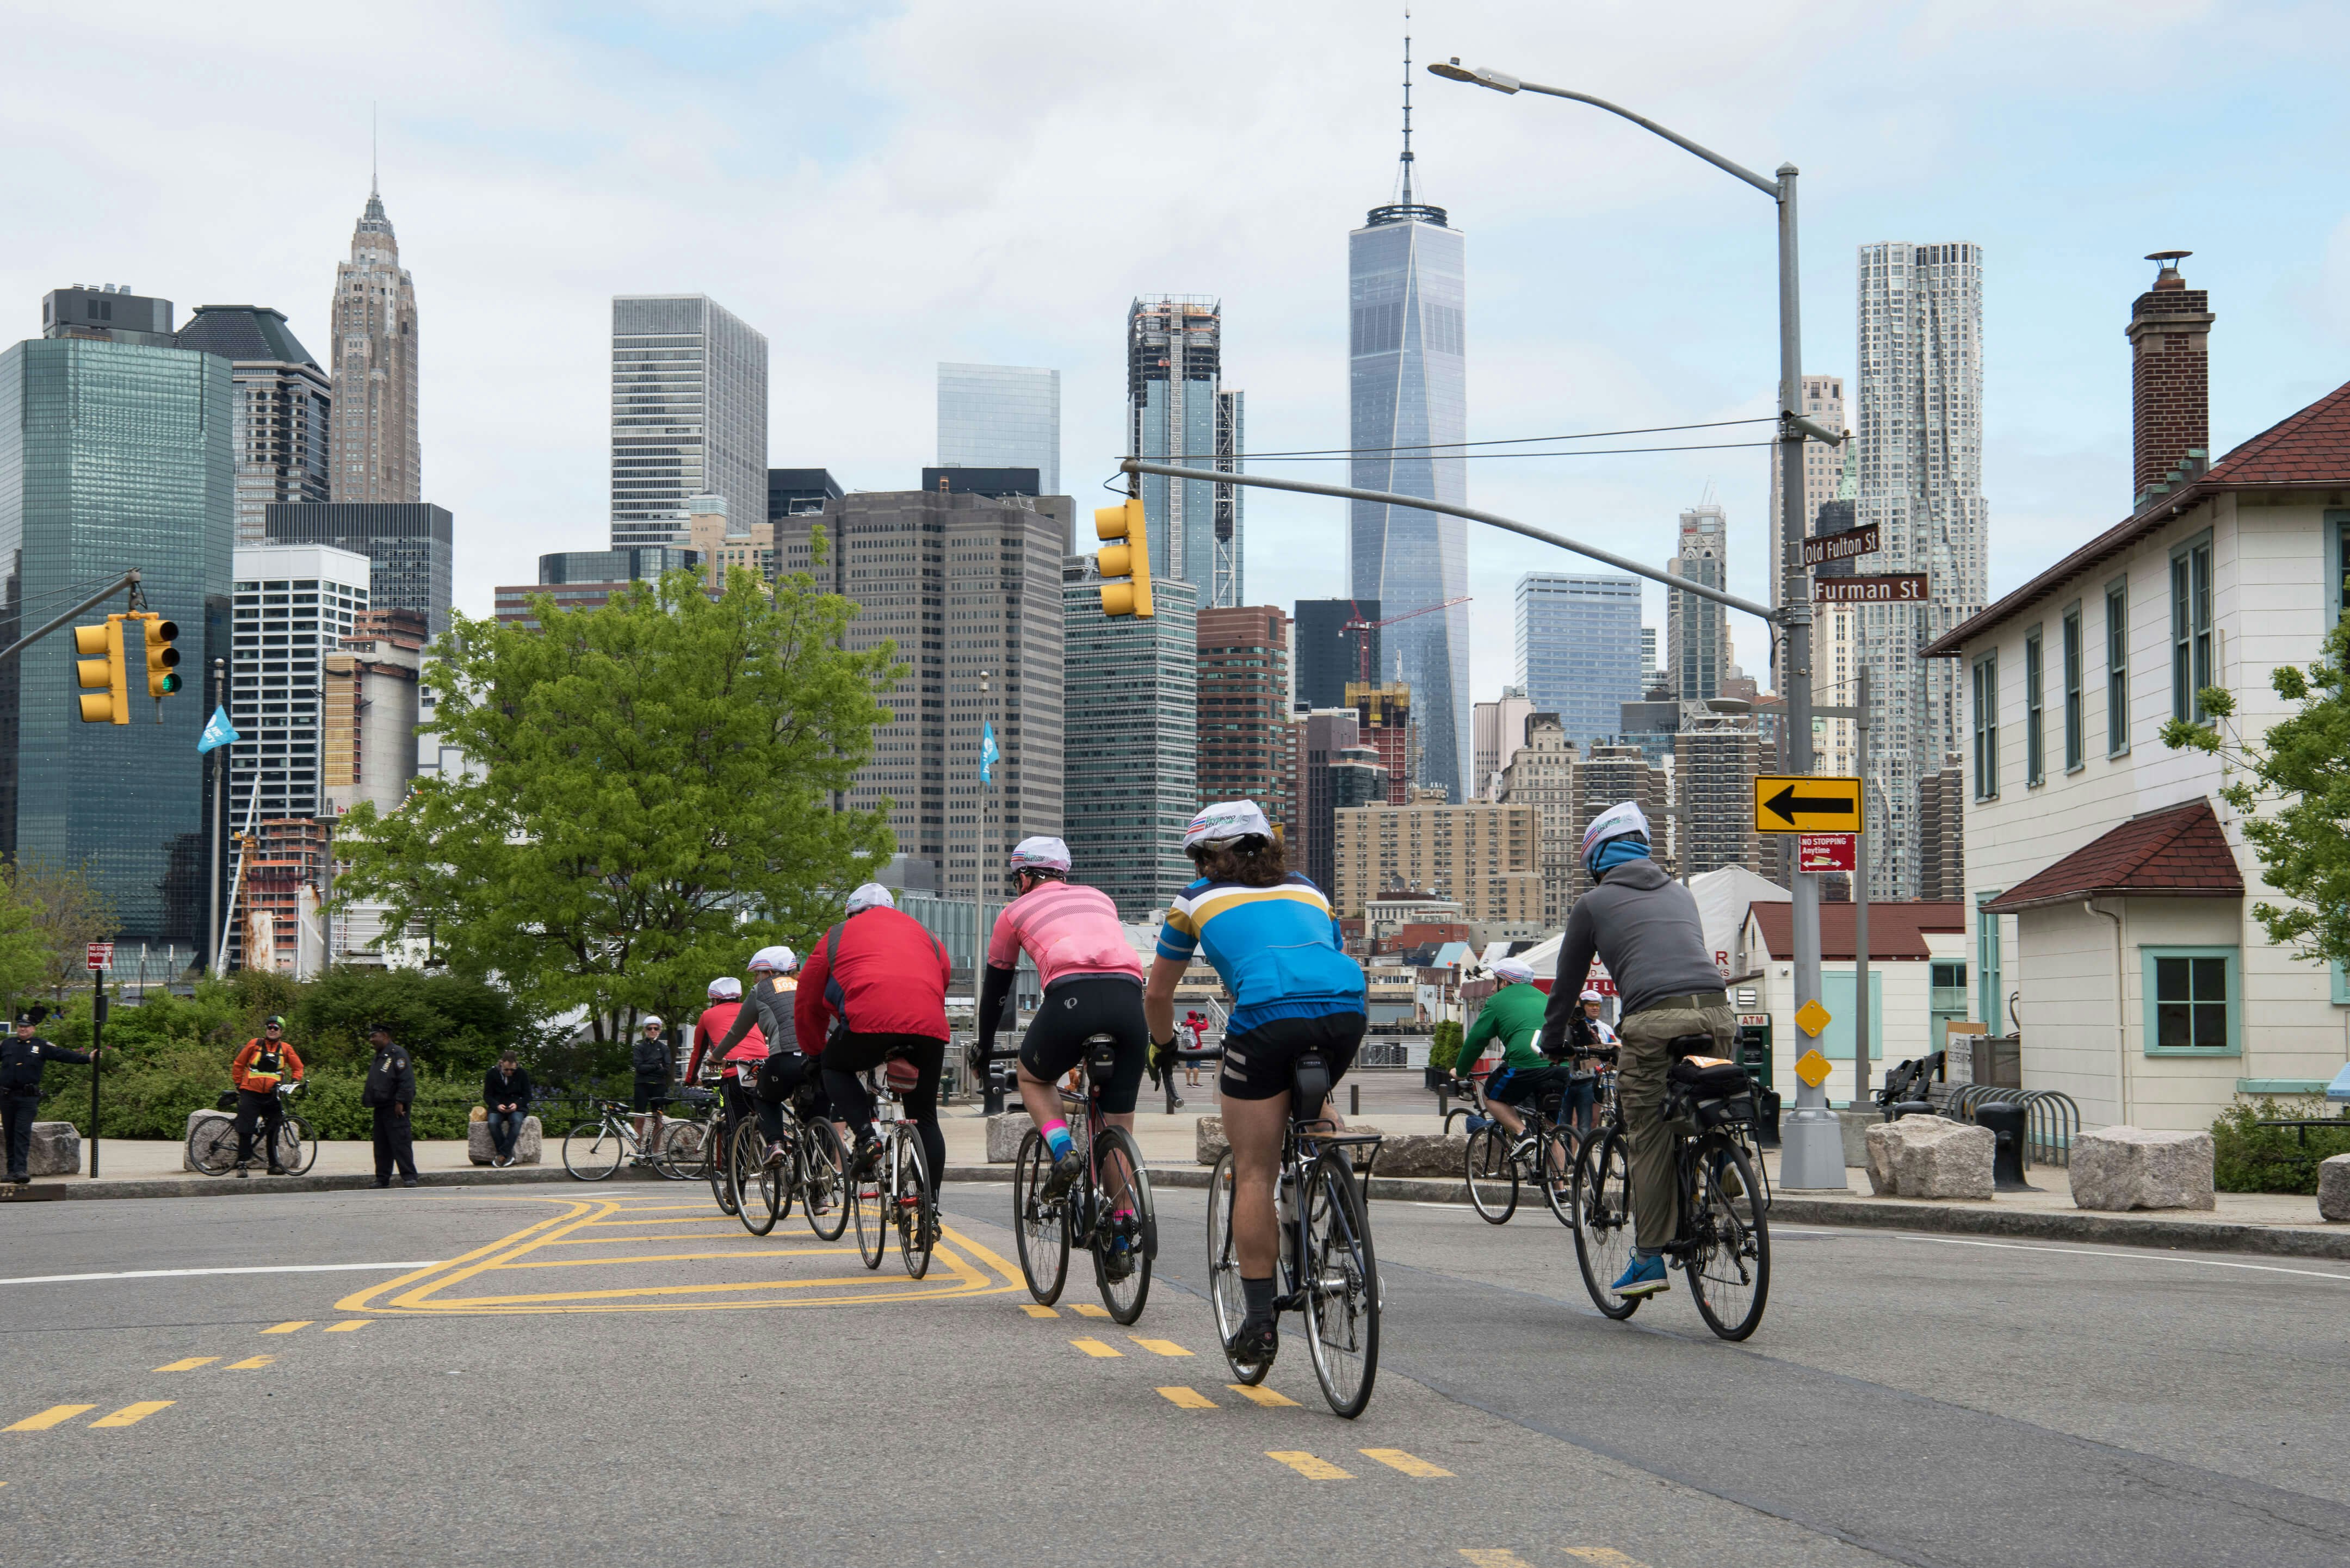 Cyclists riding in the Five Boro Bike Tour with the Manhattan skyline in the background